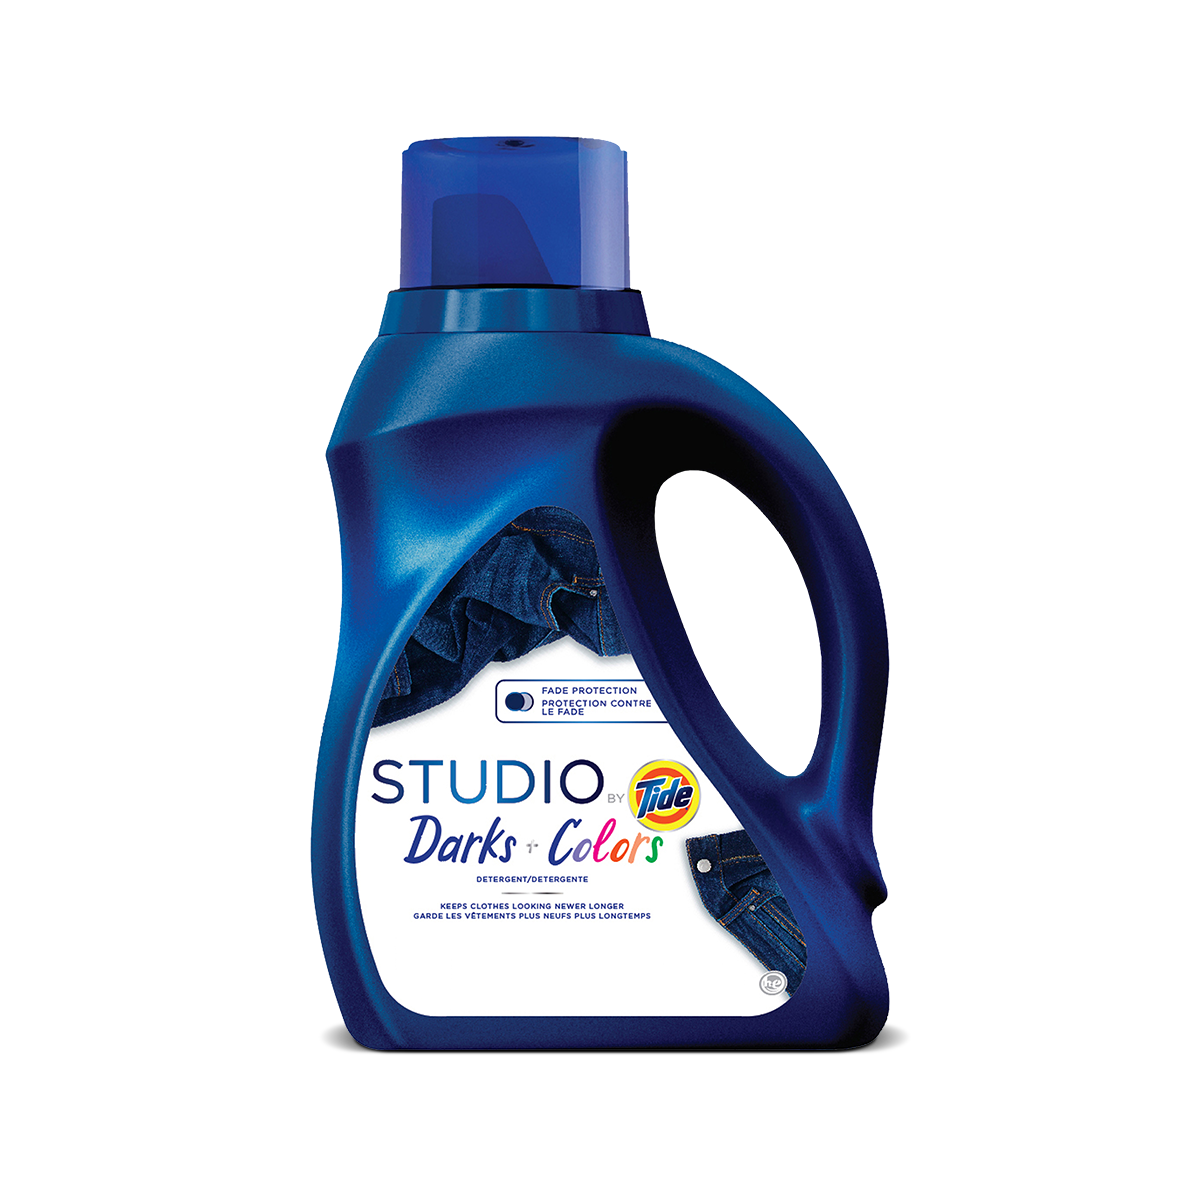 Tide Studio Liquid Laundry Detergent for Darks and Colors